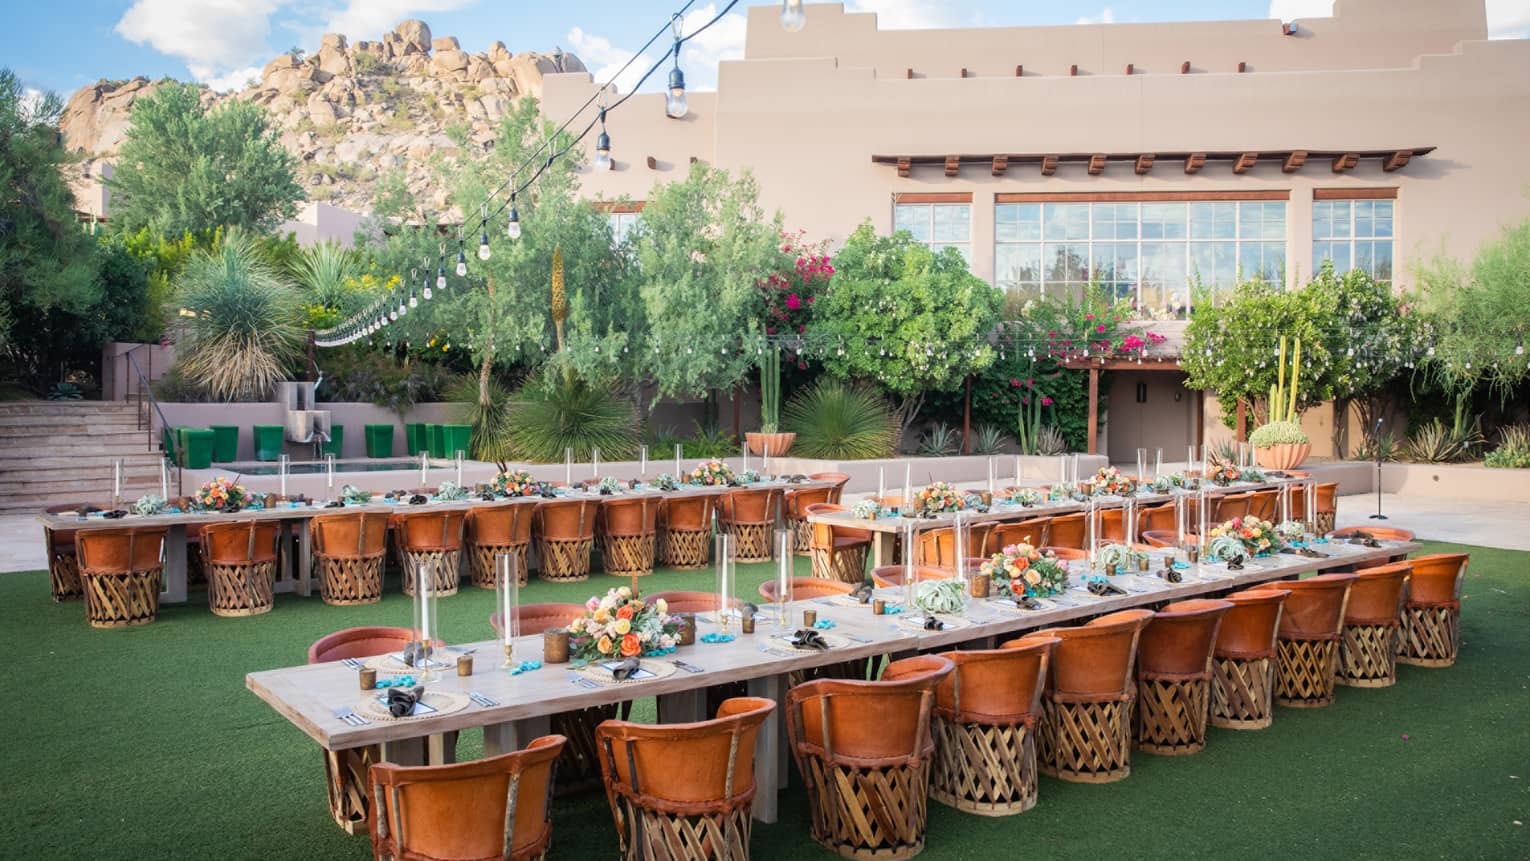 Three long tables outside with dark orange chairs on green grass next to a beige building.